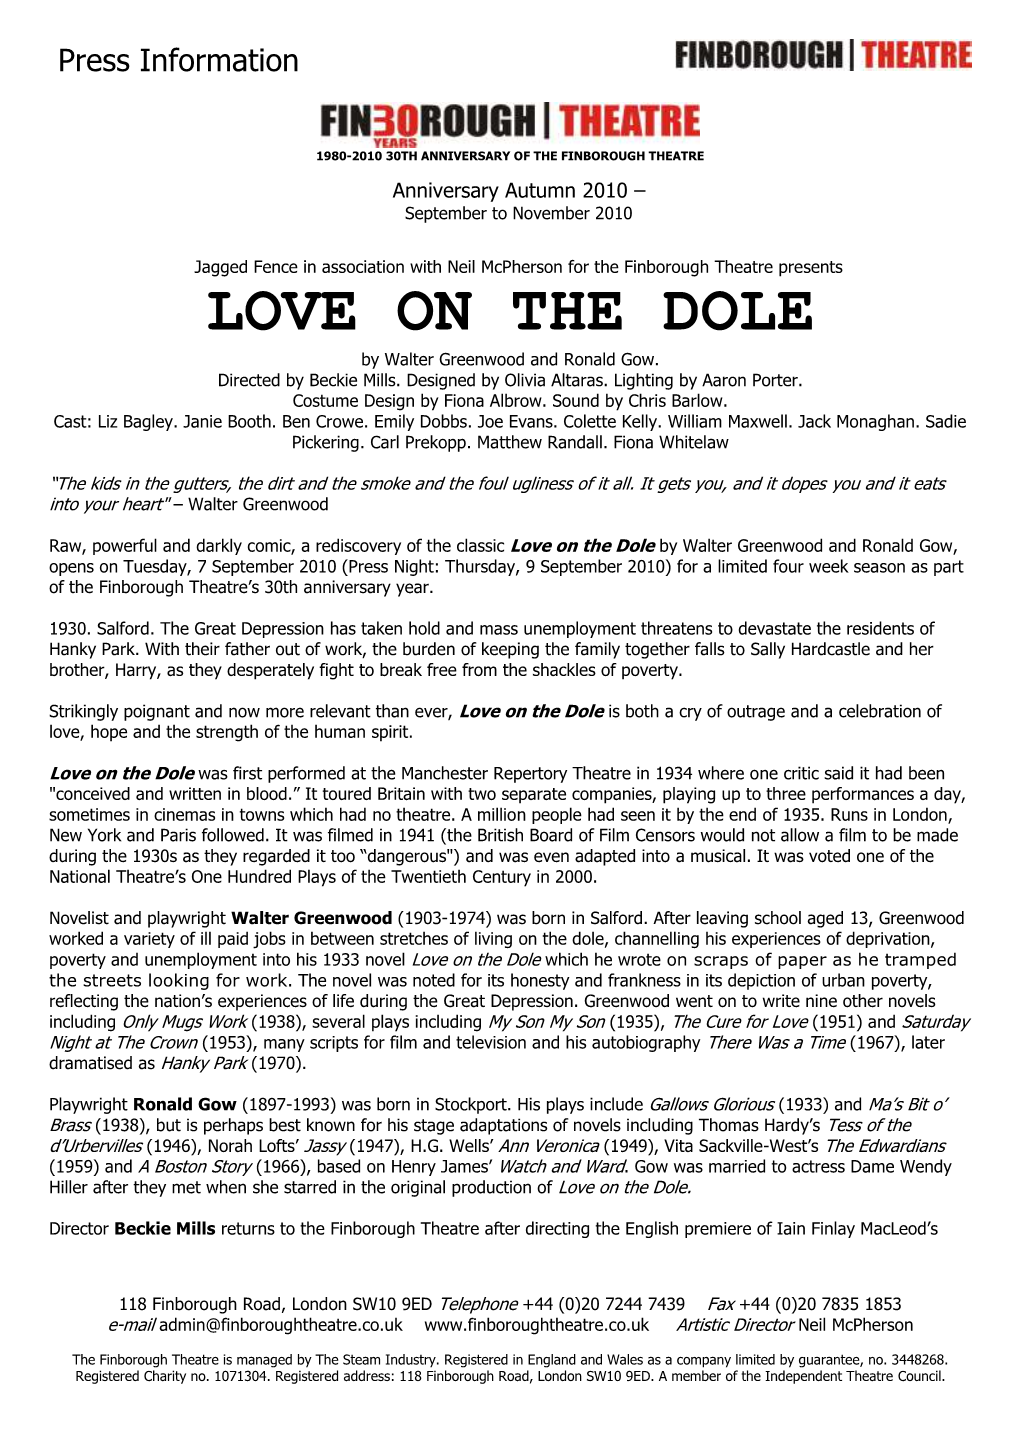 LOVE on the DOLE by Walter Greenwood and Ronald Gow